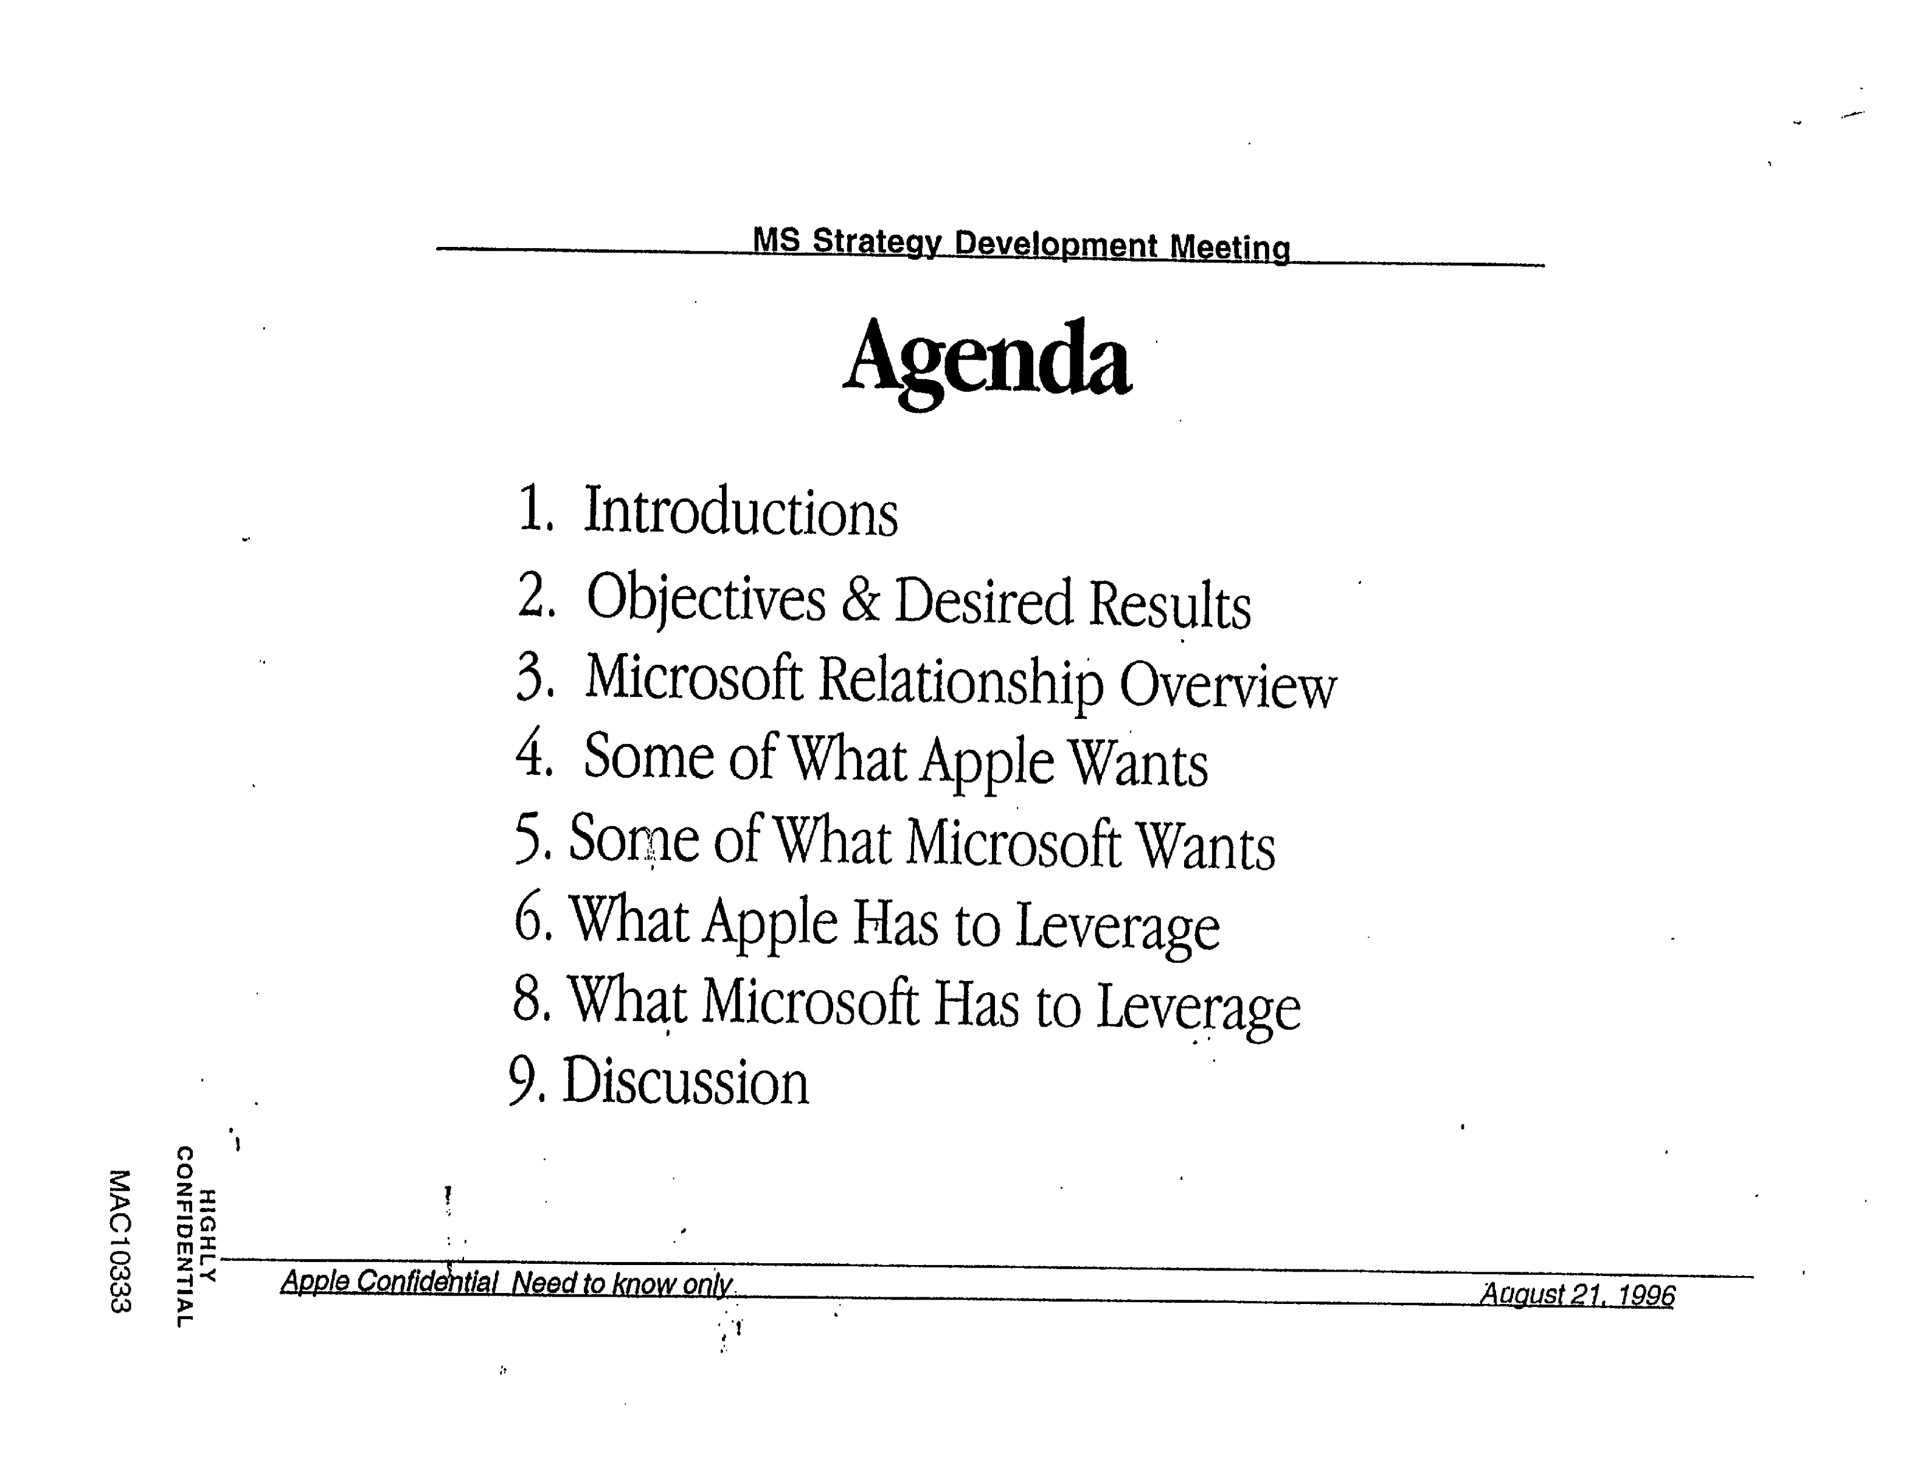 agenda introductions objectives desired results relationship overview some of what apple wants some of what wants what apple has to leverage what has to leverage discussion | Apple